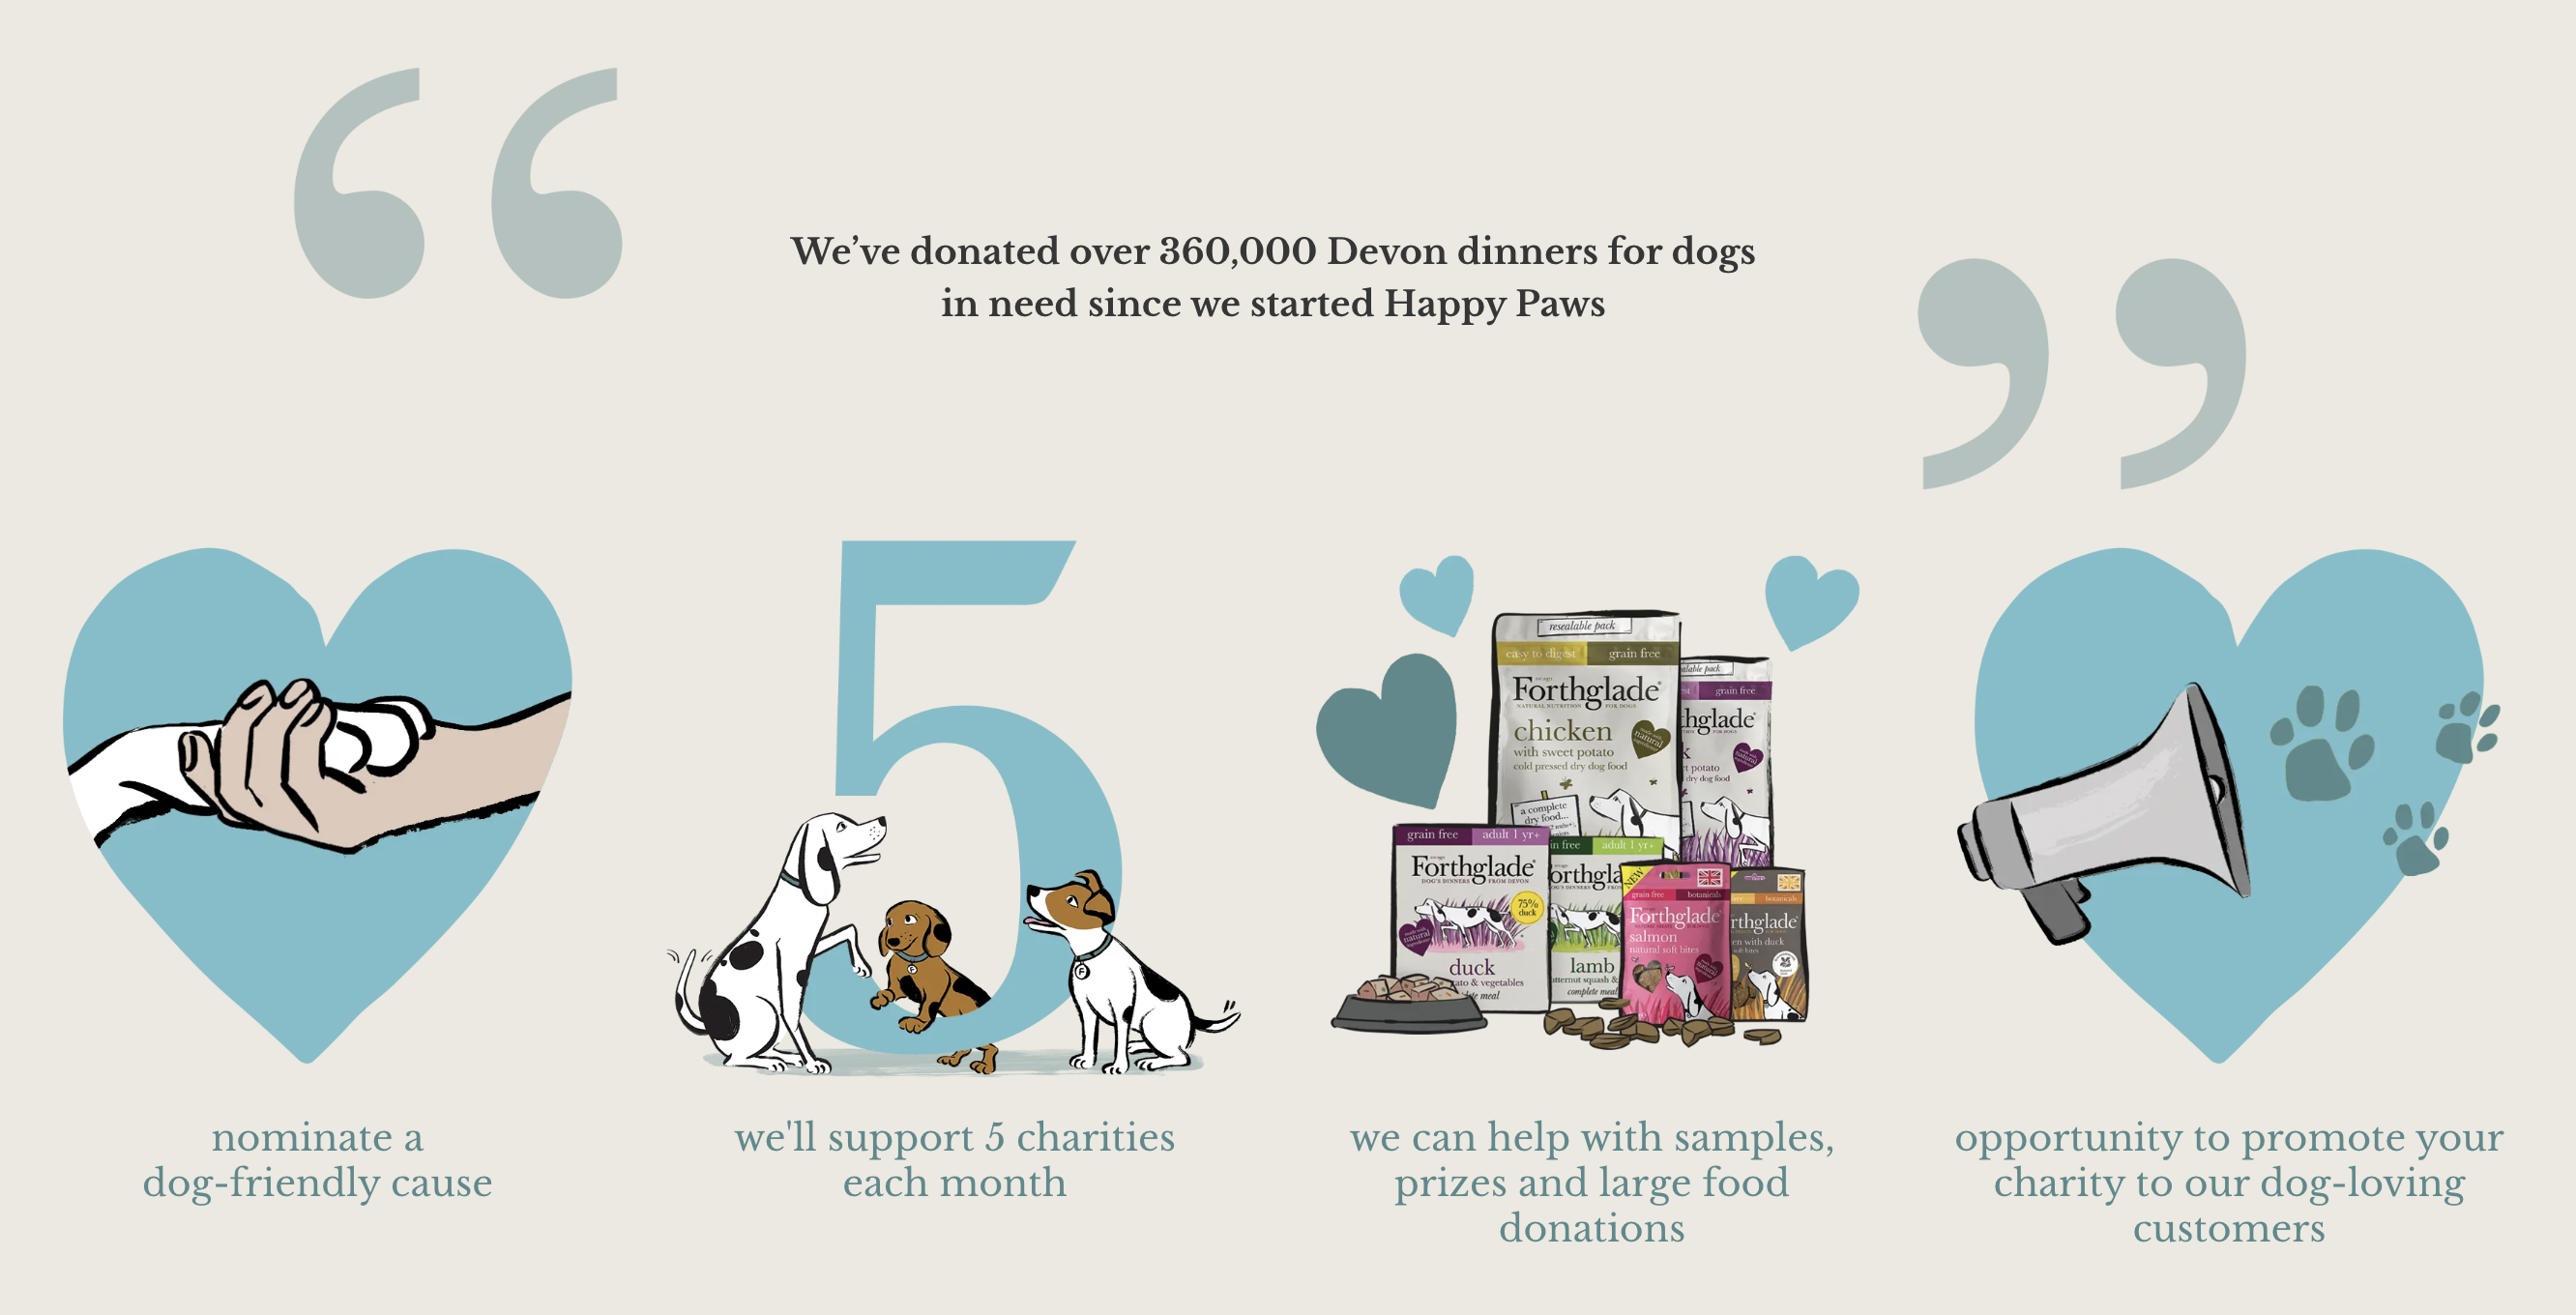 A screenshot from Forthglade's website showing the details of their Happy Paws charity initiative. 